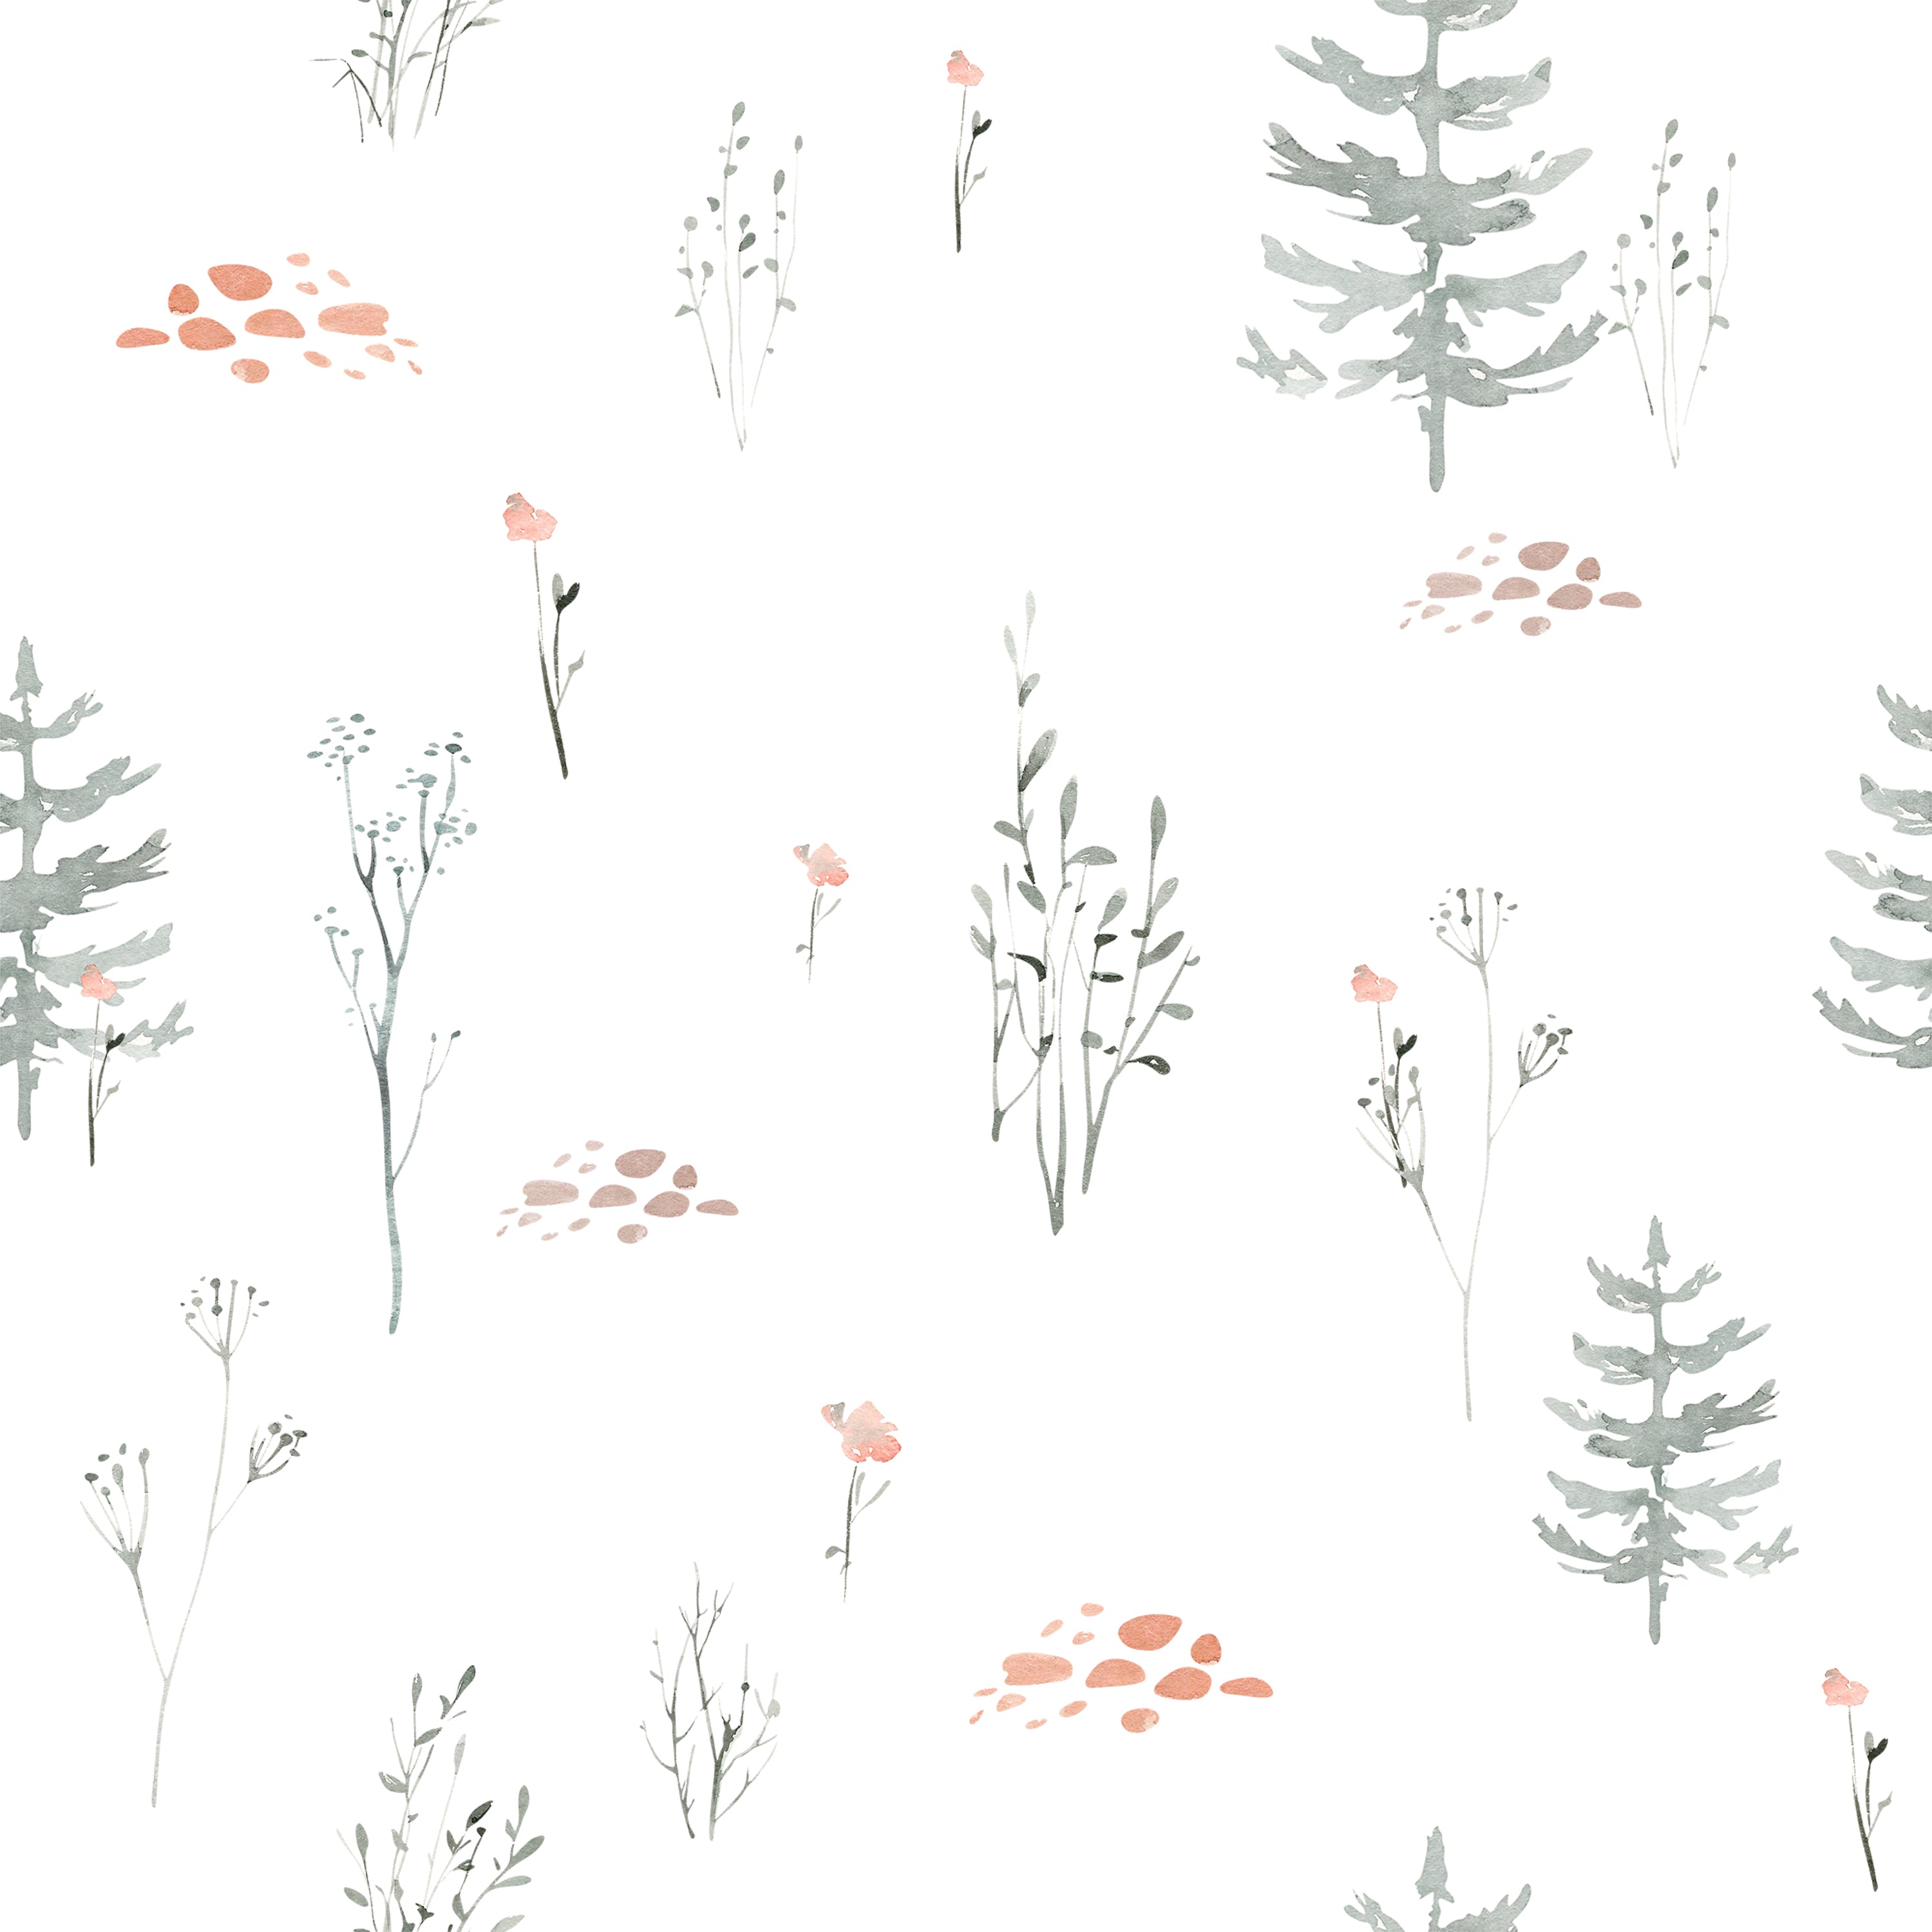 Seamless pattern of the Pine Tree Wallpaper, featuring delicate watercolor illustrations of pine trees, small plants, and clusters of stones in soft gray and pale orange tones on a white background. The design exudes a tranquil, natural feel, ideal for adding a serene touch to any space.